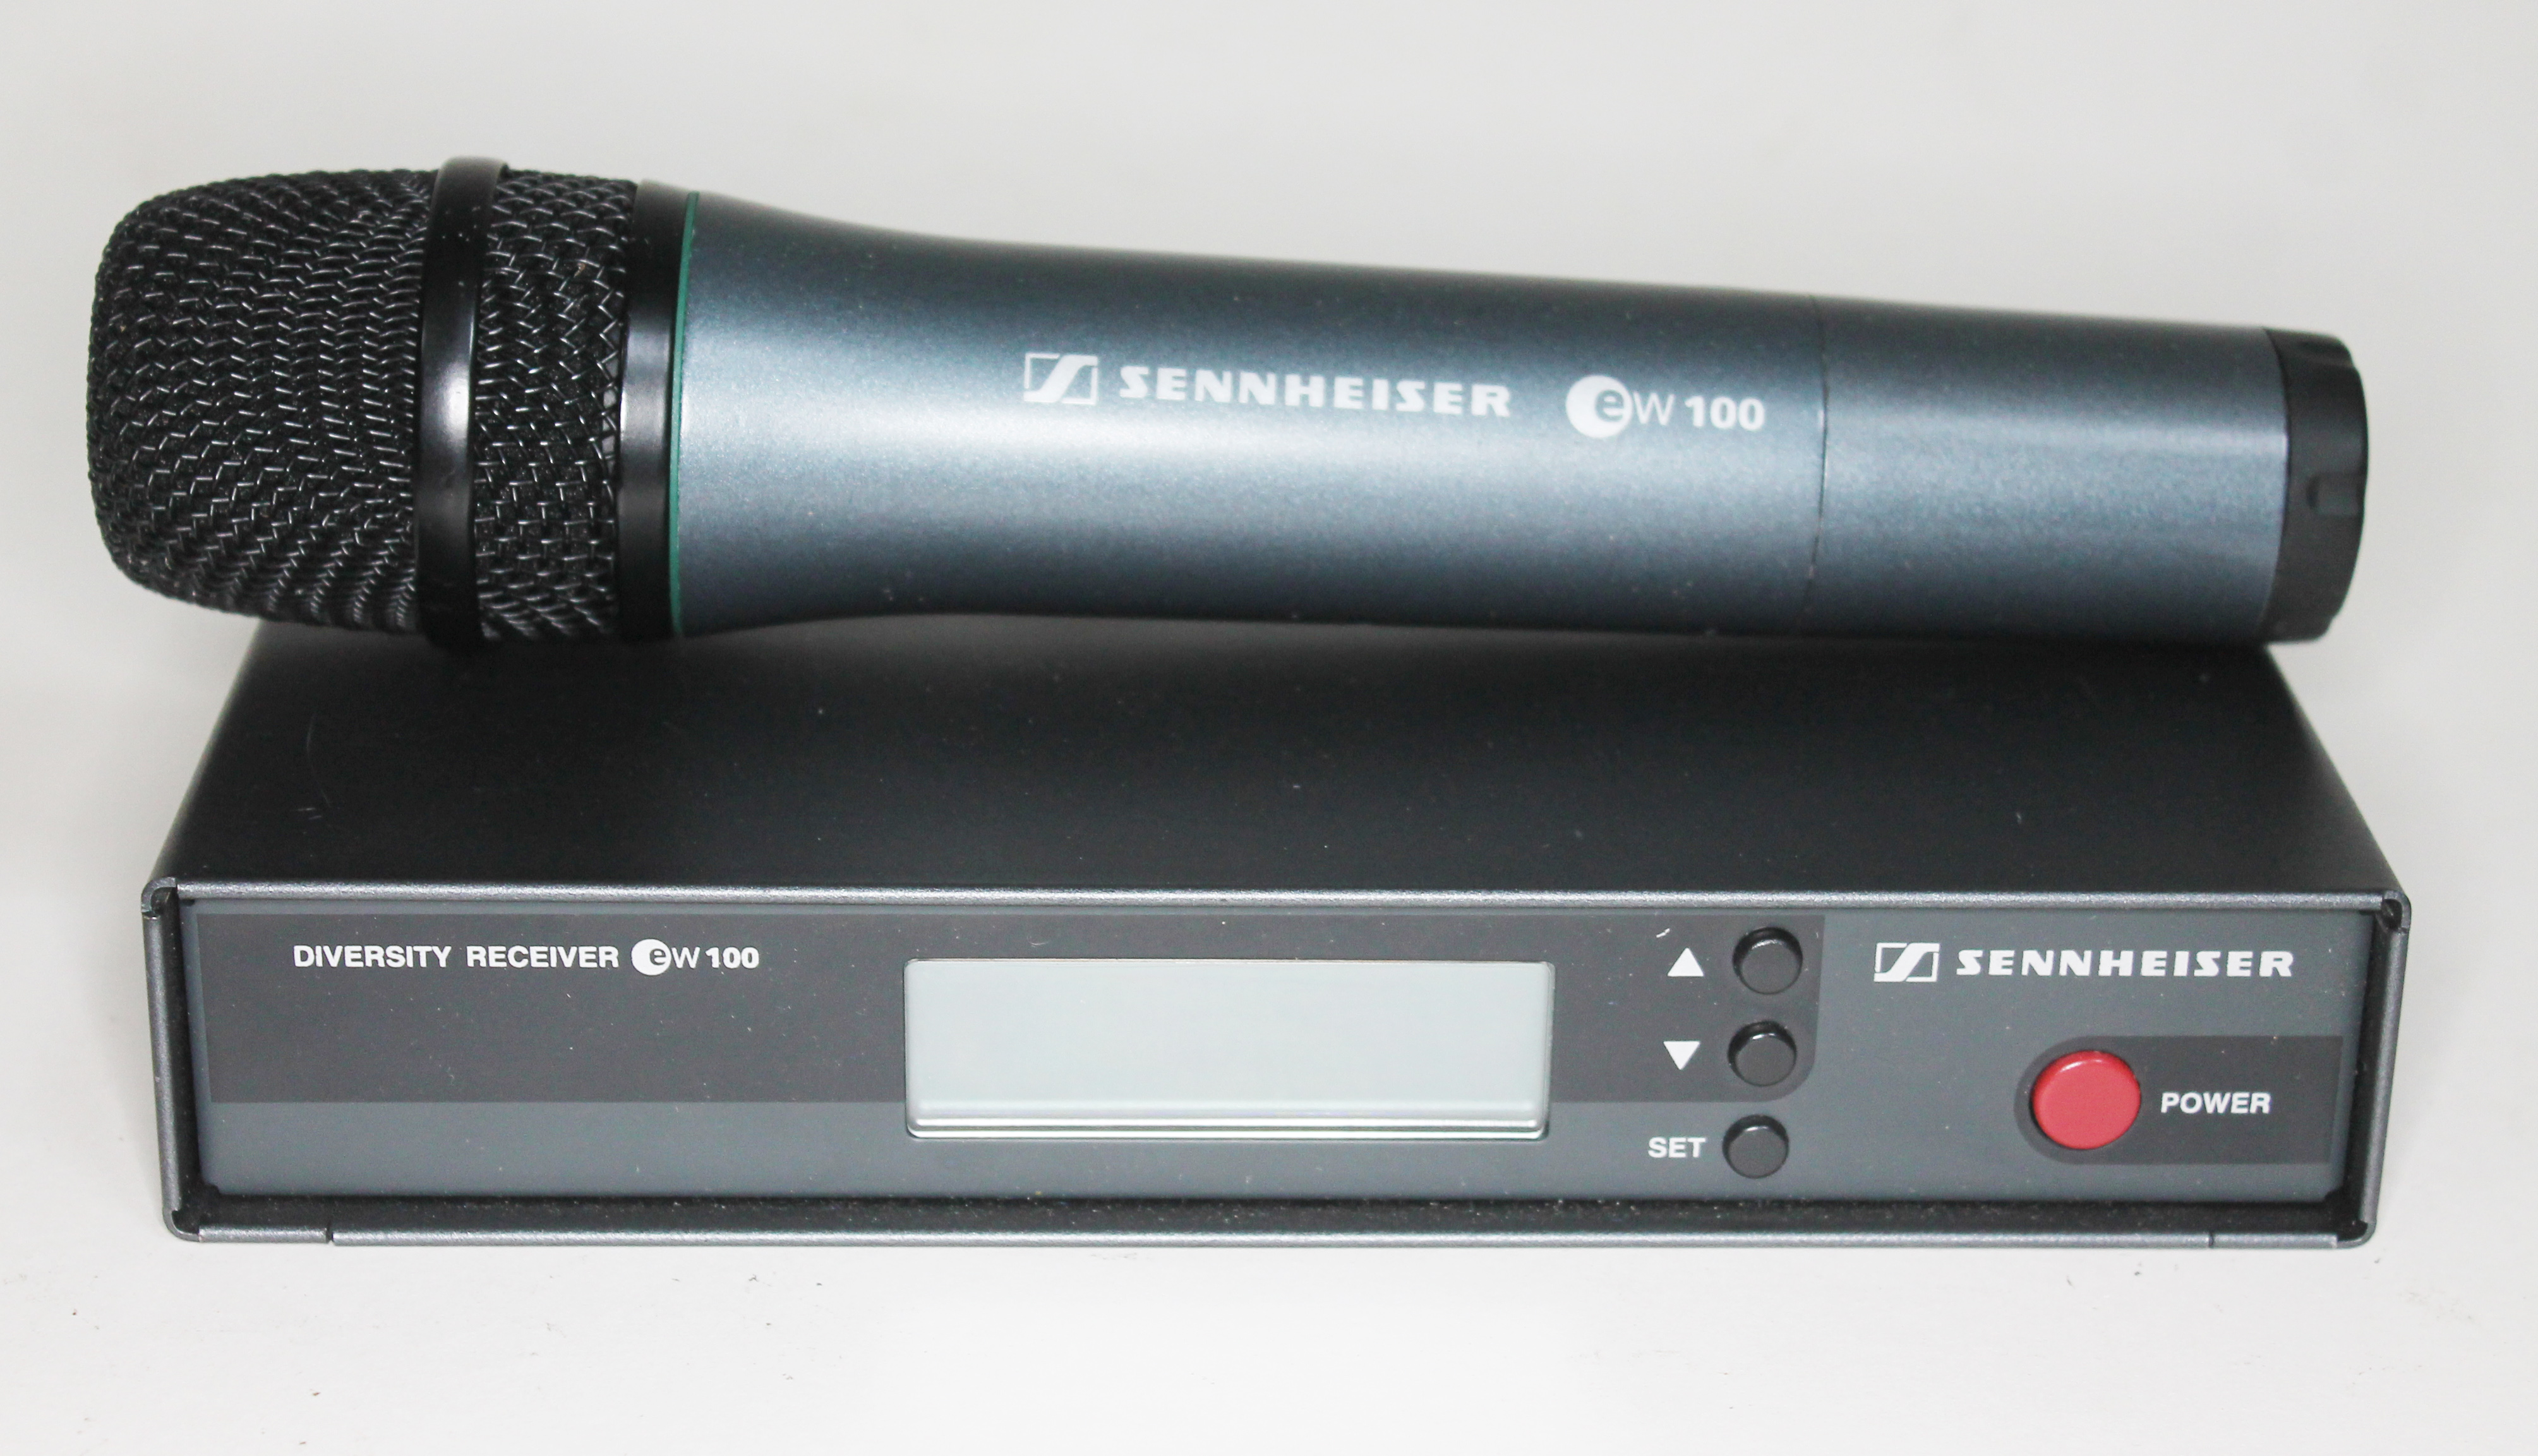 A Sennheiser EW100 wireless microphone with EW100 receiver, case and accessories. Condition - not